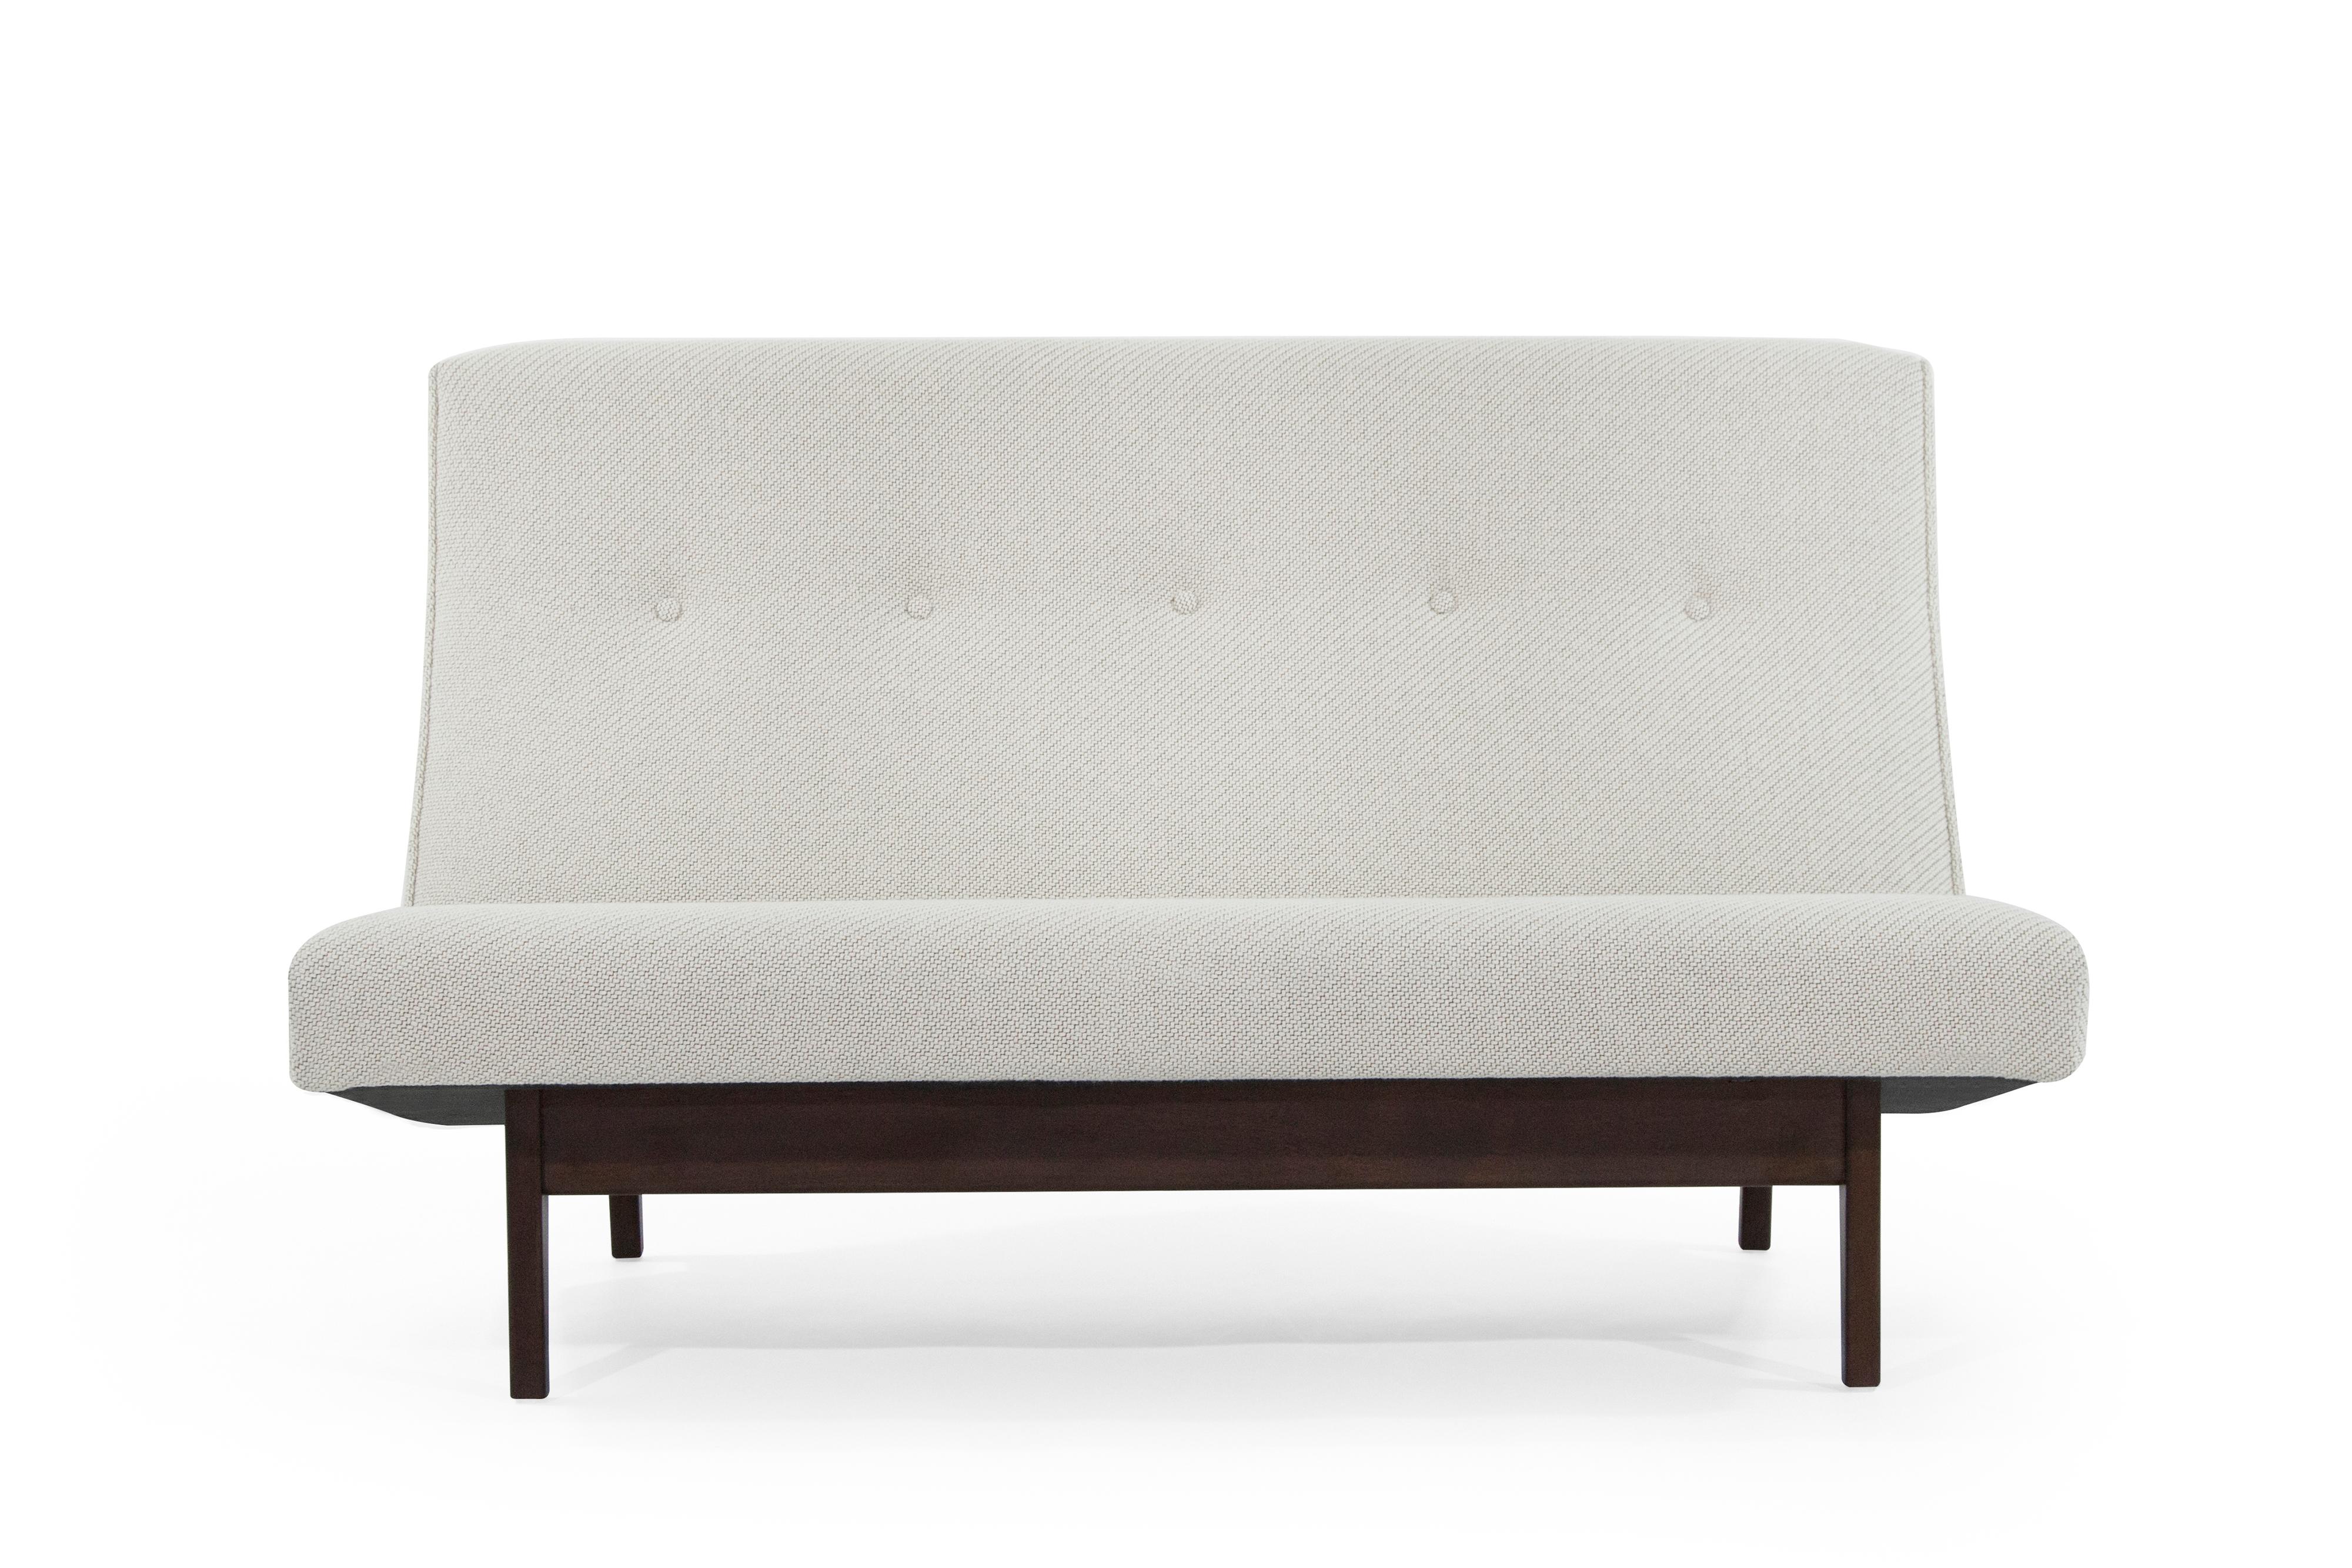 Stunning Jens Risom for Jens Risom designs settee, model U-251, circa 1950s. Sculptural walnut bases have been completely restored. Newly upholstered in an off-white Maharam/Kvadrat coda soft wool. 

Matching pair available, priced individually.